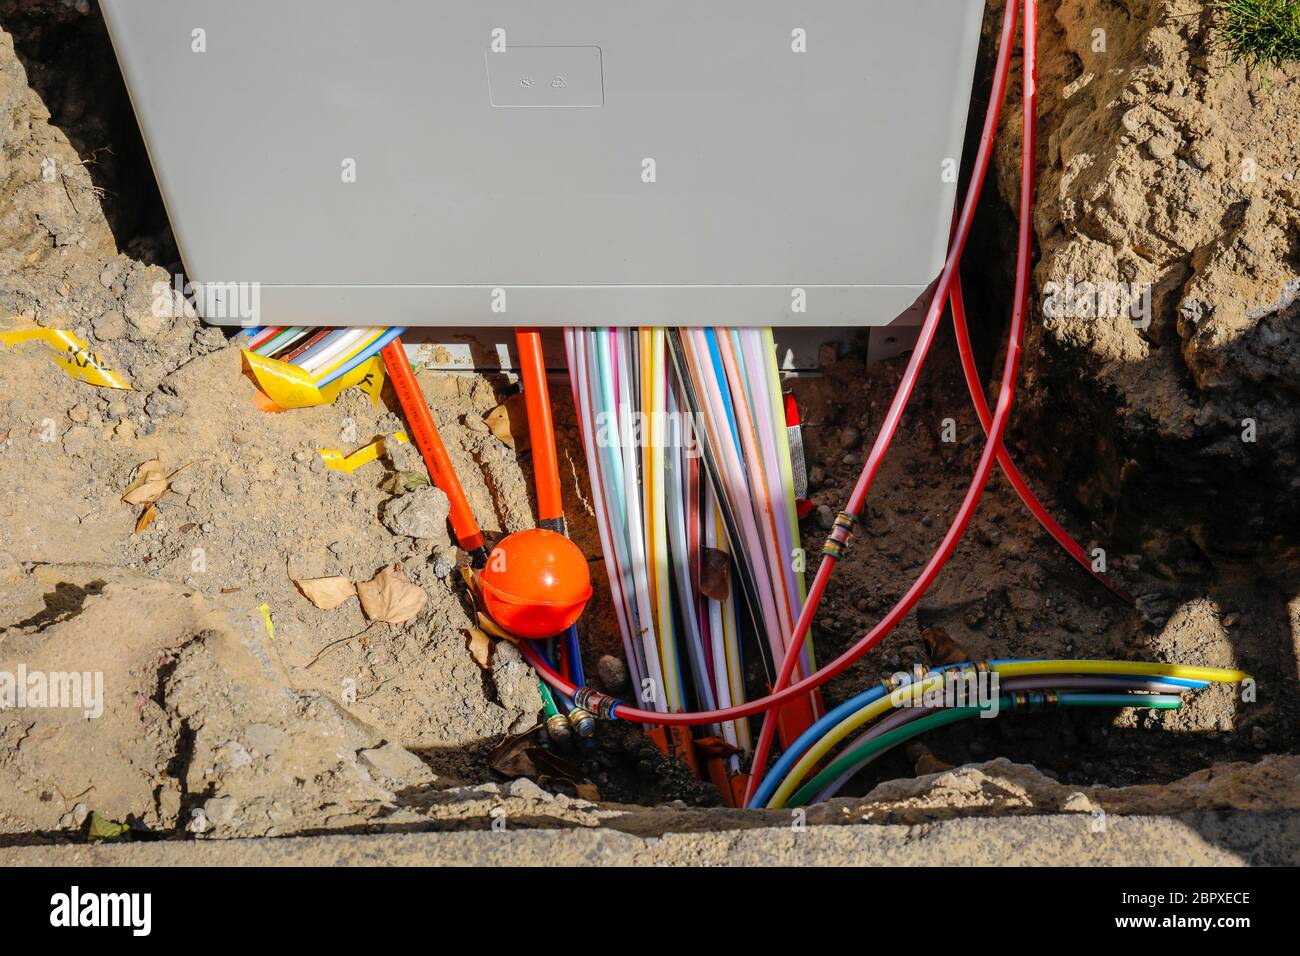 Datteln, Ruhrgebiet, Nordrhein-Westfalen, Germany - Telekom distribution box for fast internet, construction site DSL cable connection for households. Stock Photo